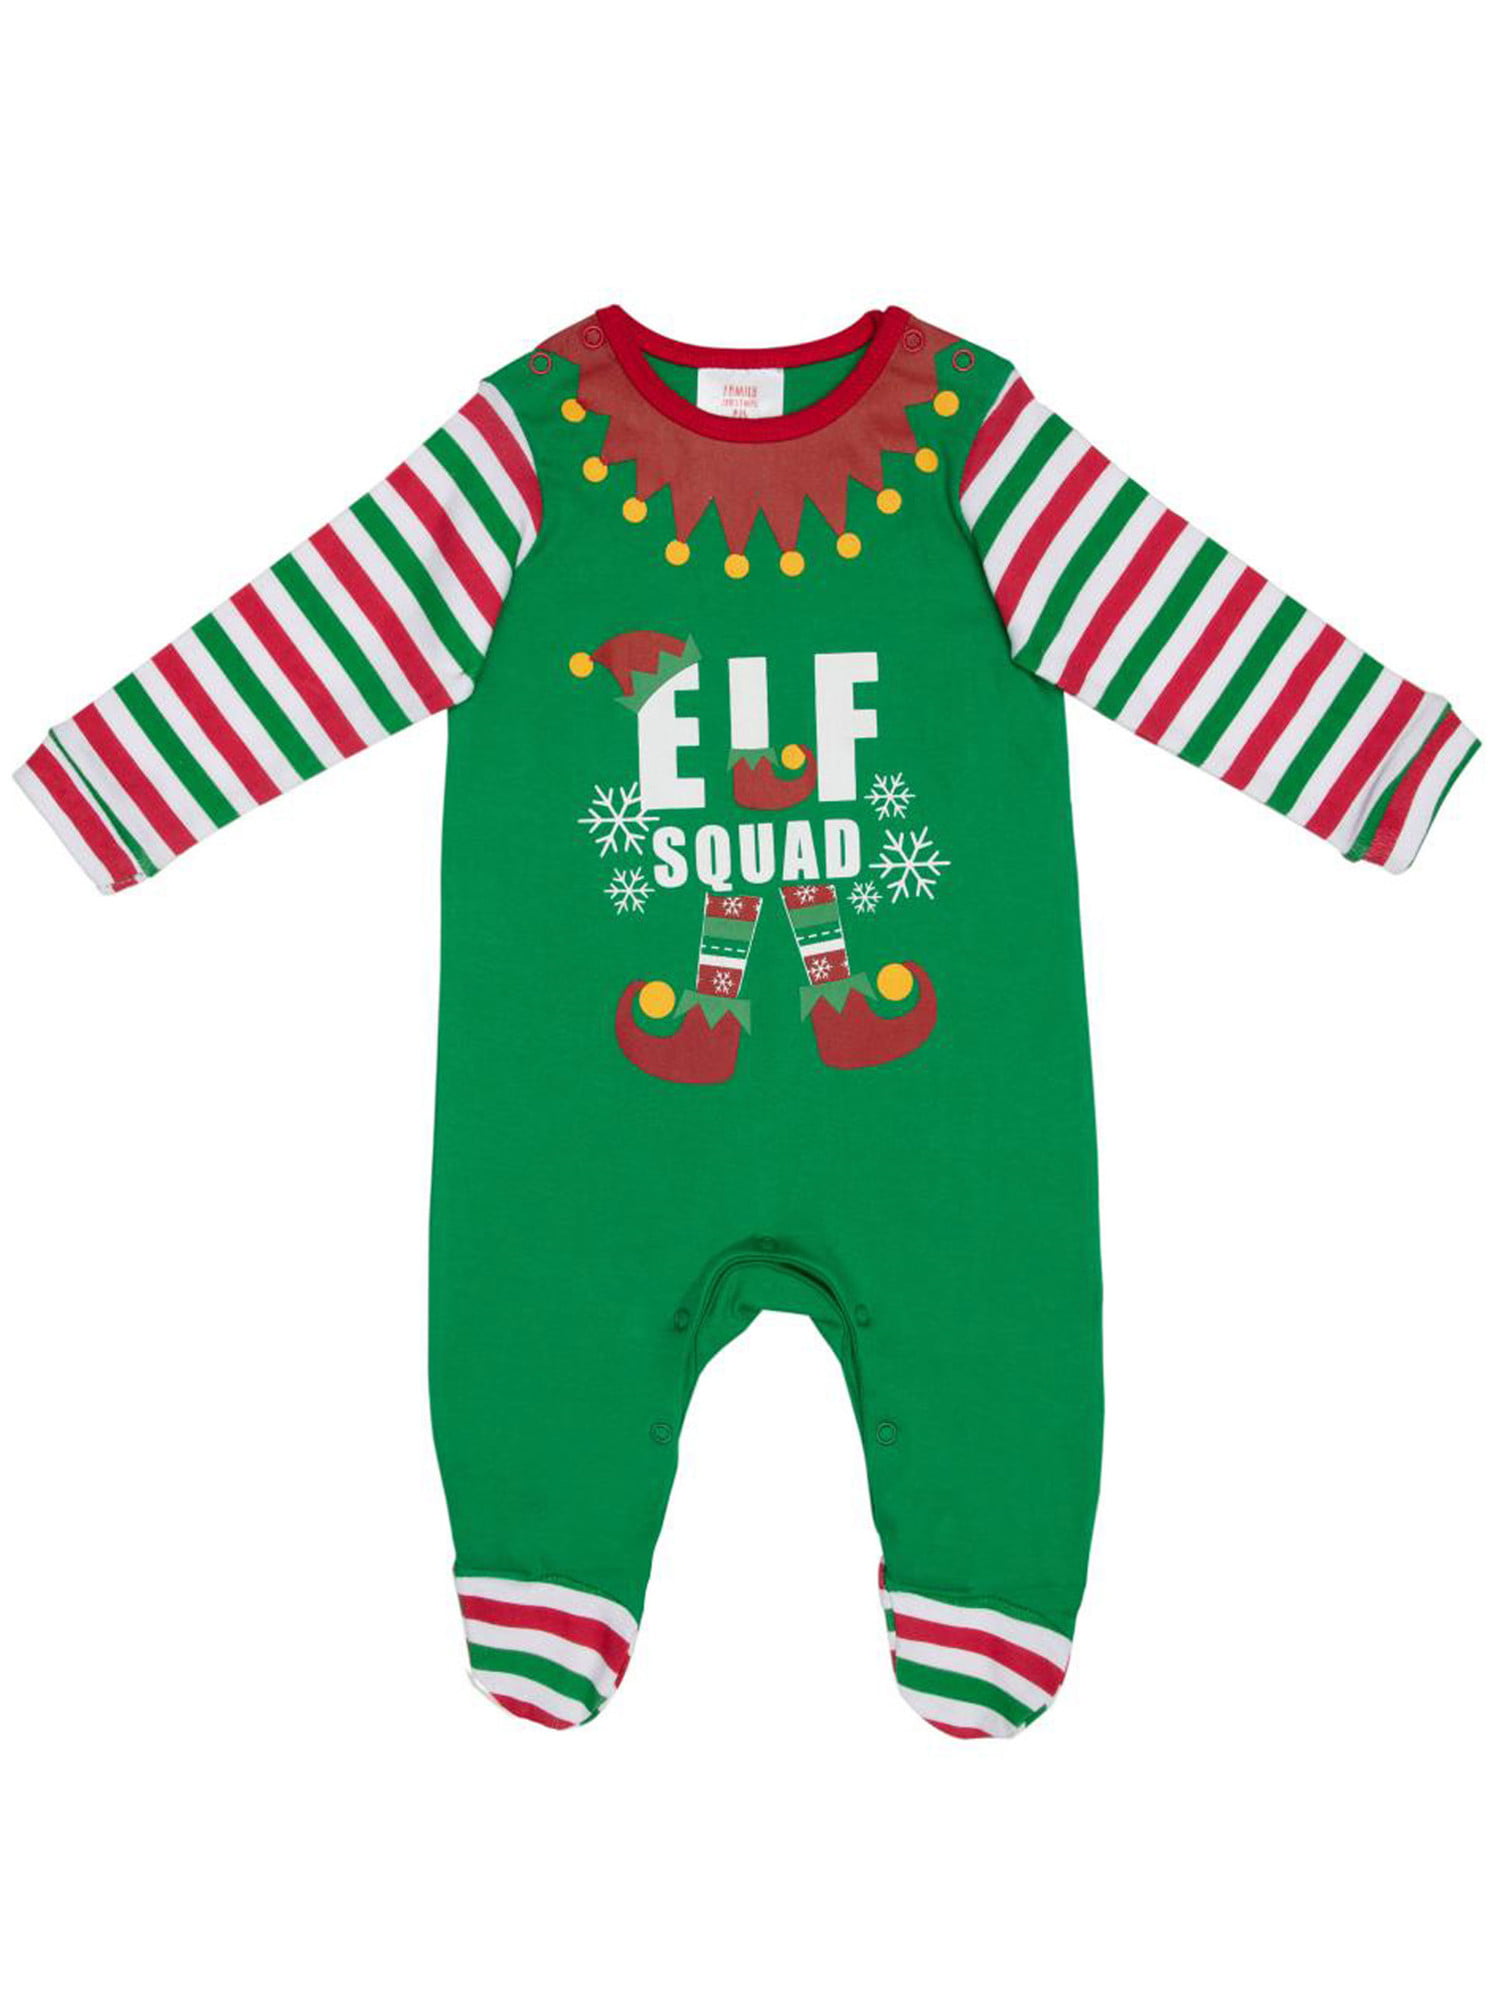 Details about   AVENUE MENS MERRY CHRISTMAS FAMILY DADDY ELF PAJAMAS SIZE MEDIUM EURO NEW W/ TAG